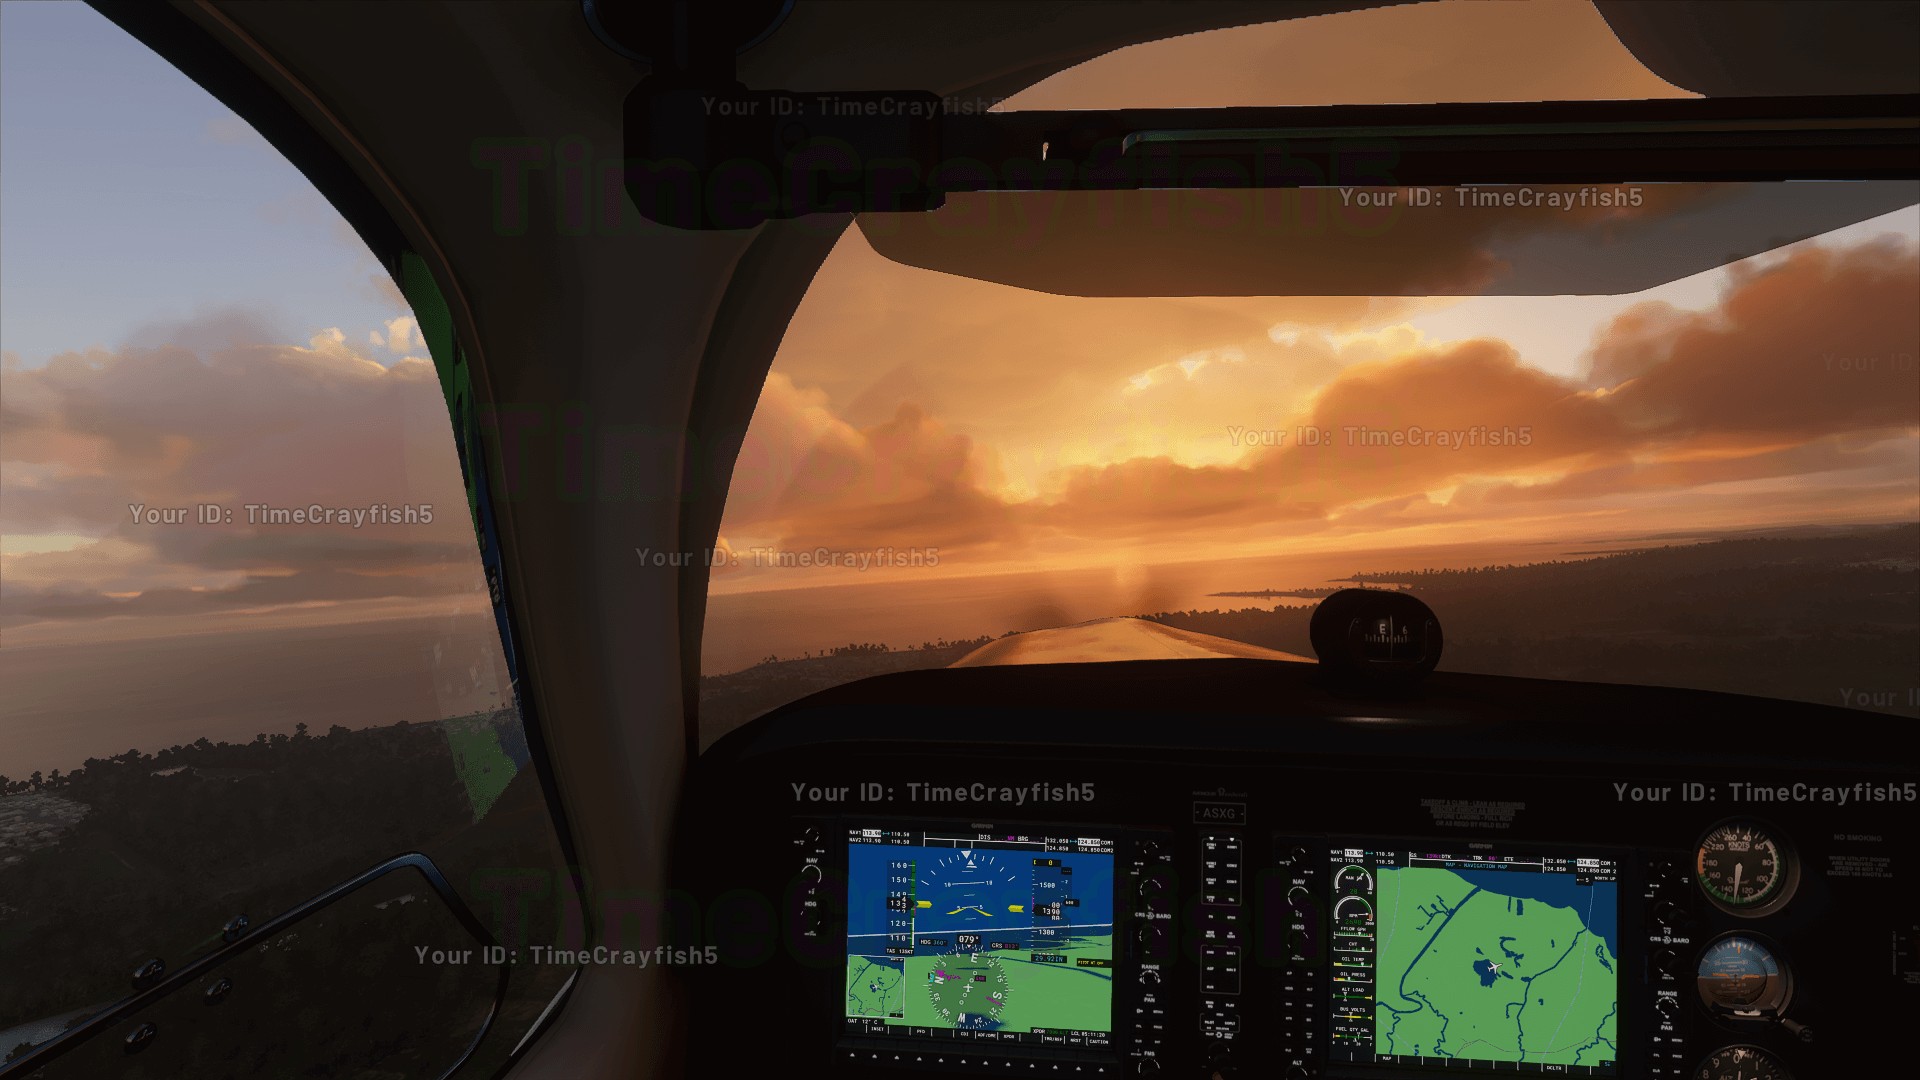 Microsoft Flight Simulator is getting a VR closed beta by early November